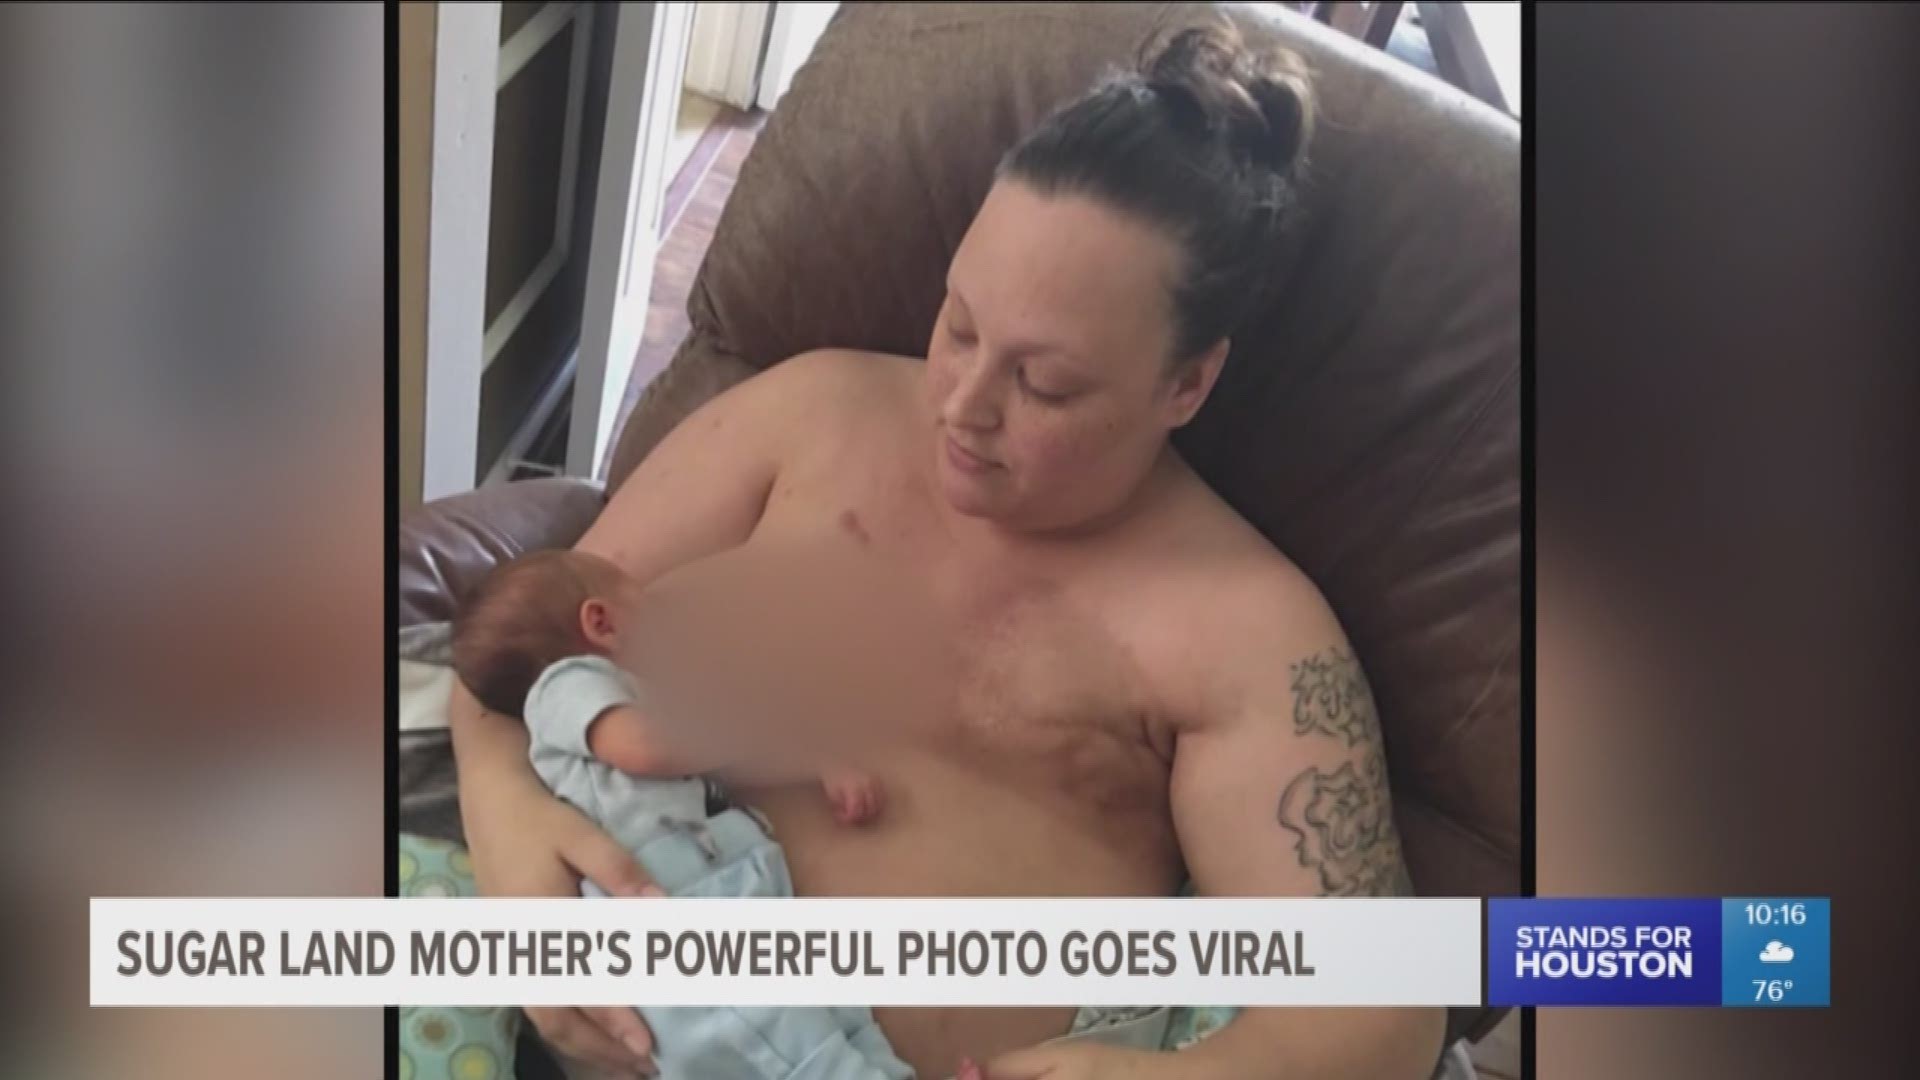 A mother shares a photo of her breastfeeding her baby via Facebook. The photo is powerful because it shows a woman's fight to live and have a child. 